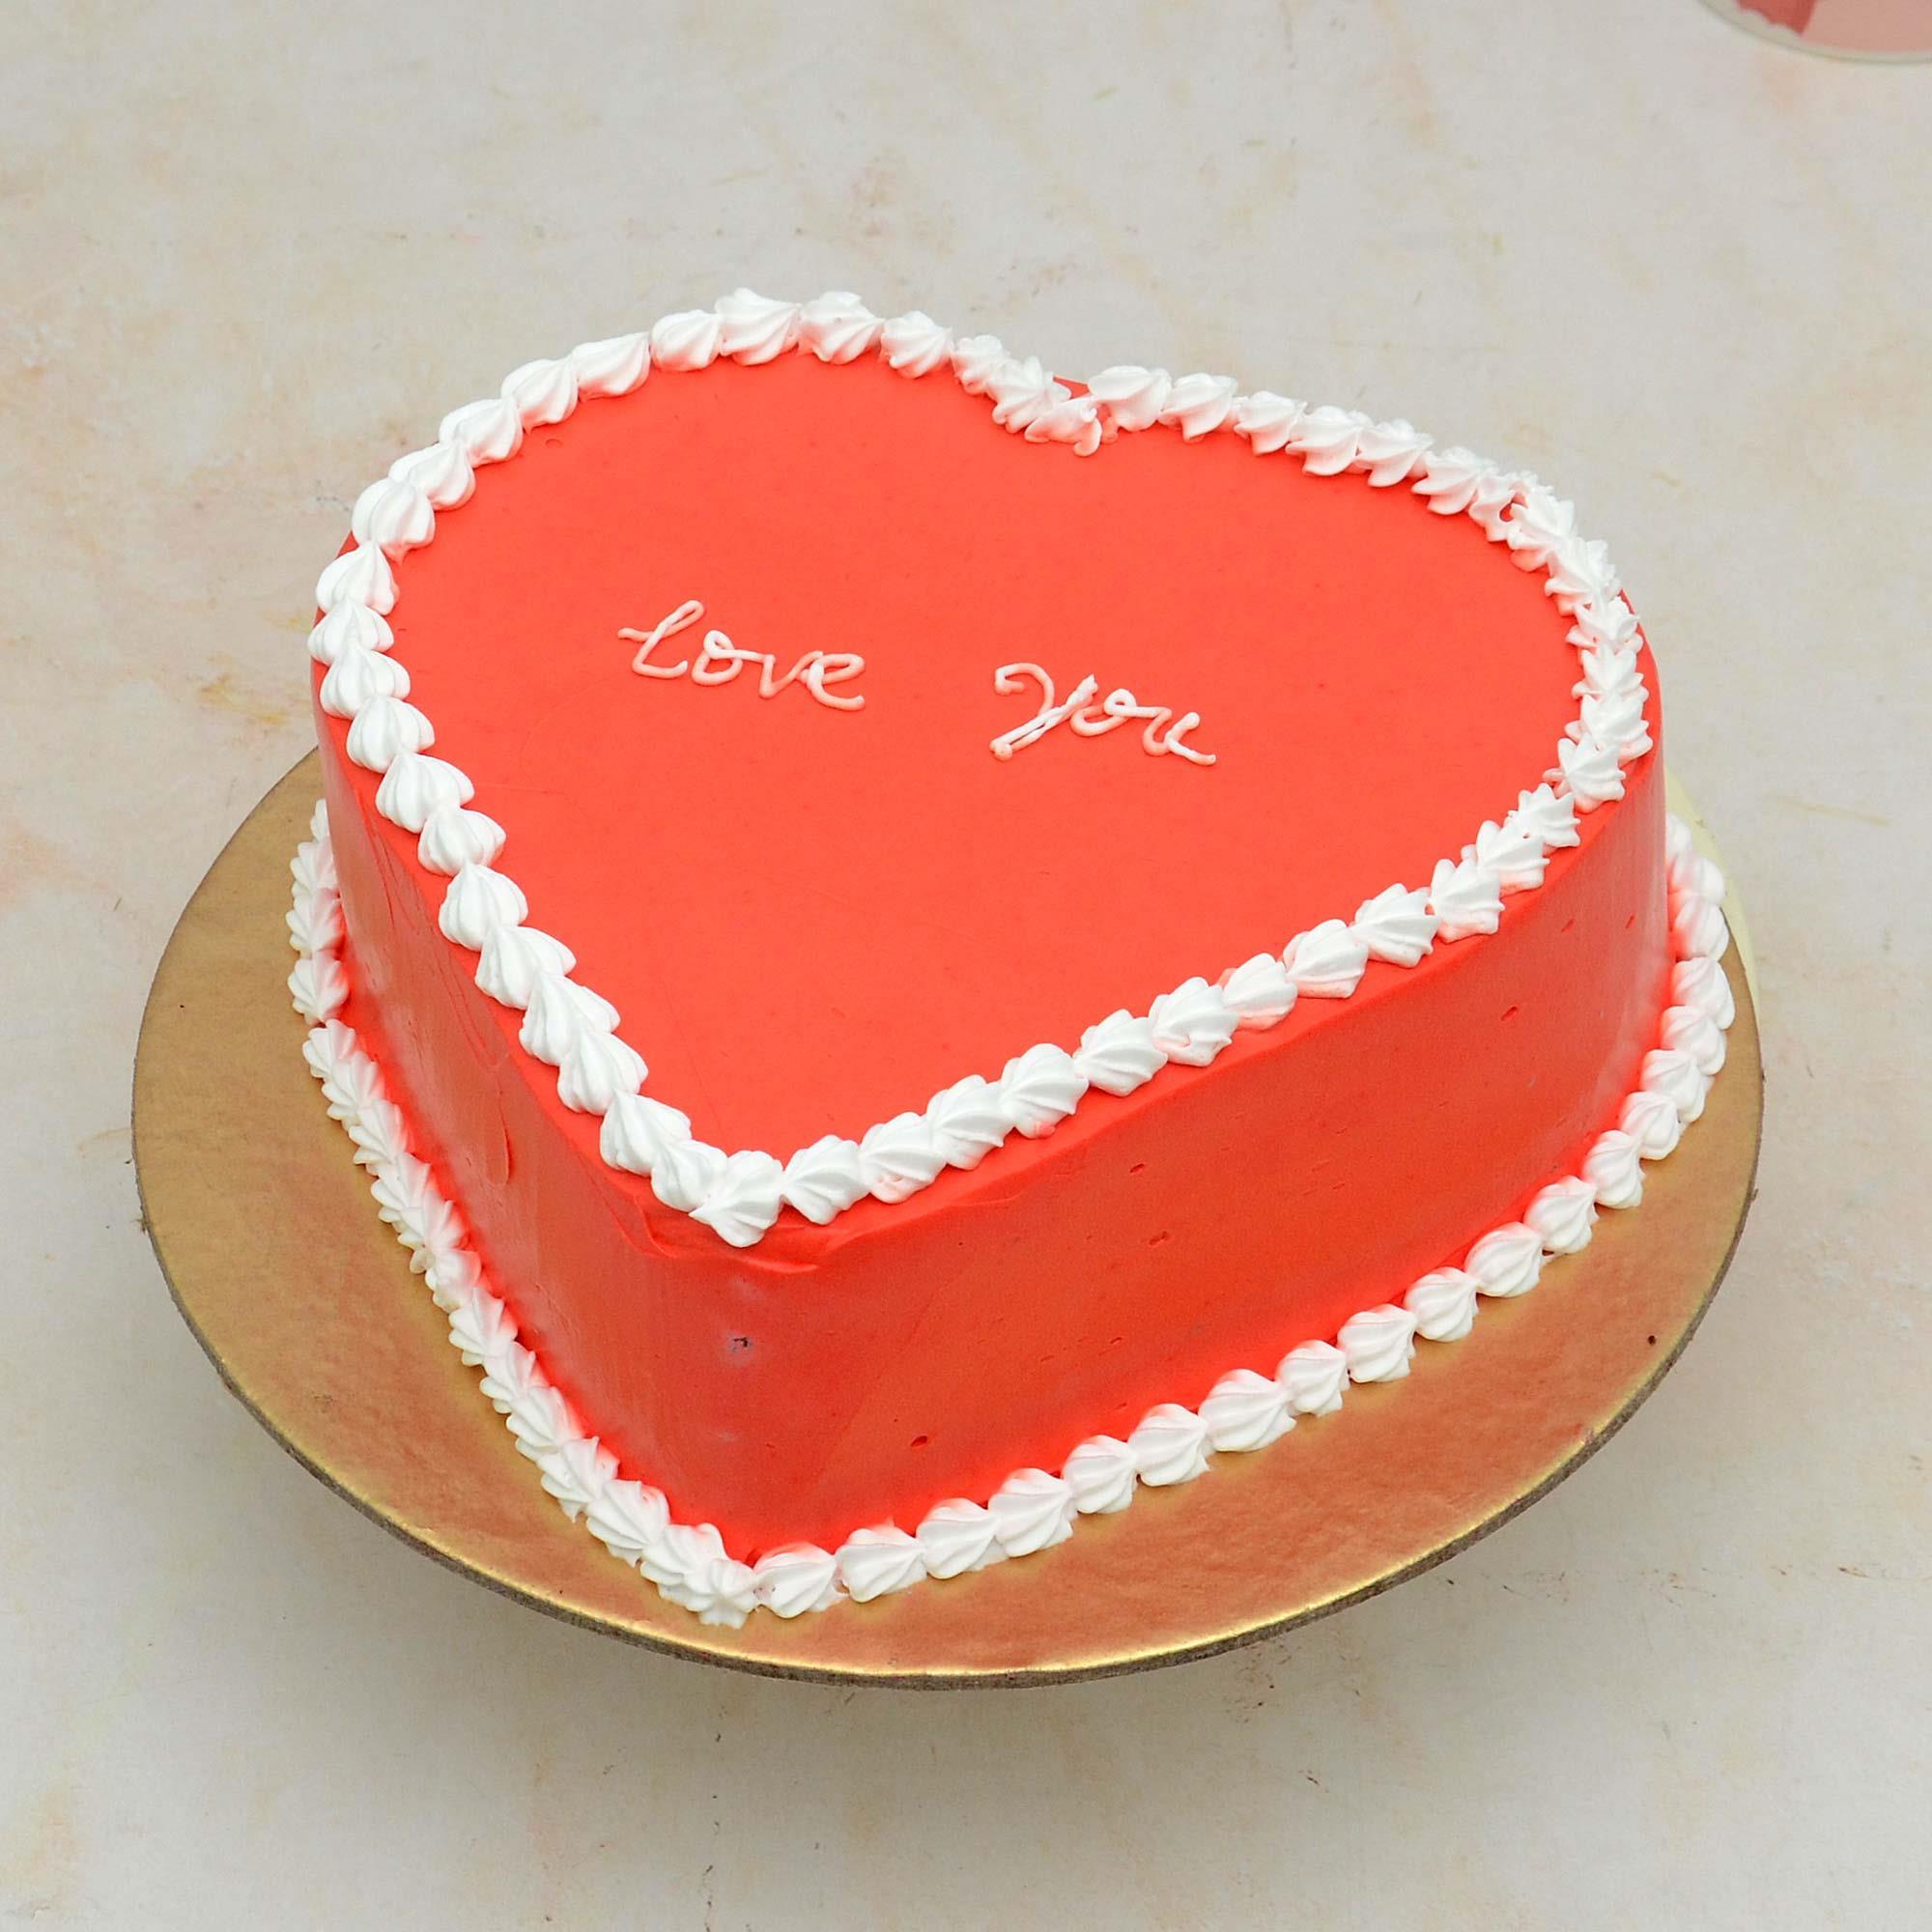 Shop for Fresh Delicious Mother And Son Love Bond Cake online - Gurgaon